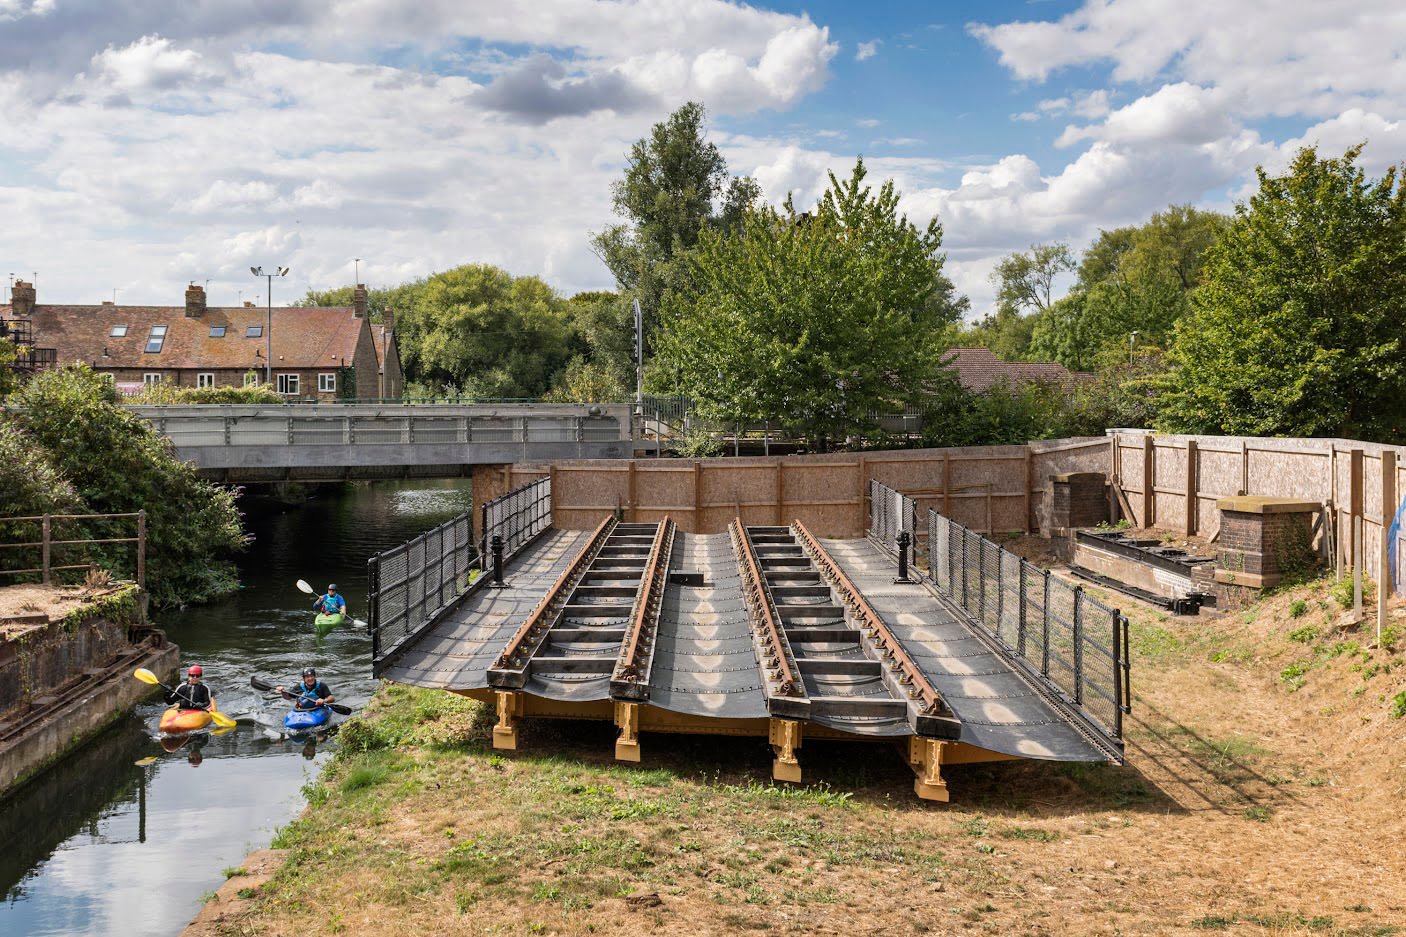 A metal structure with railway tracks sits on the bank next to a river with canoeists.